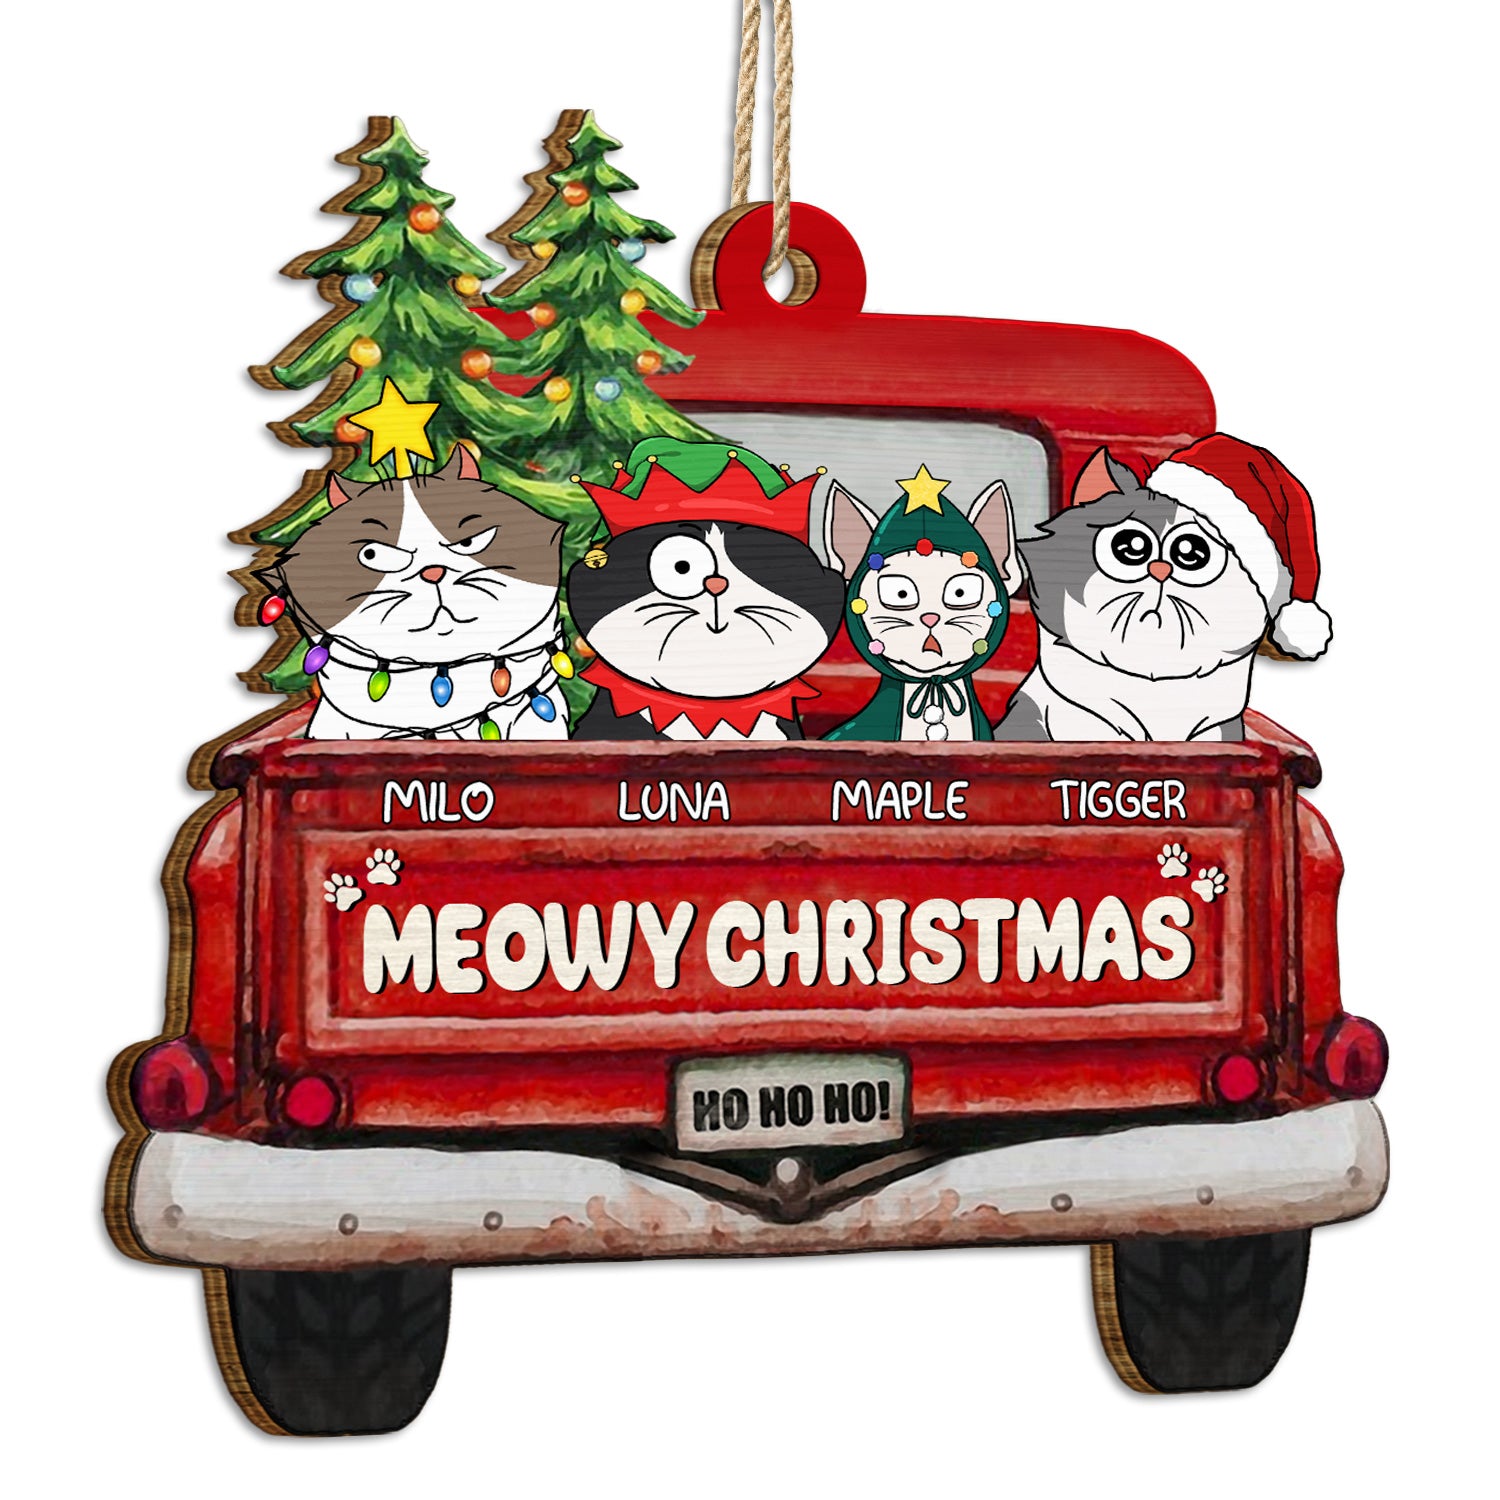 Meowy Christmas - Christmas Gift For Cat Lovers - Personalized Wooden Cutout Ornament